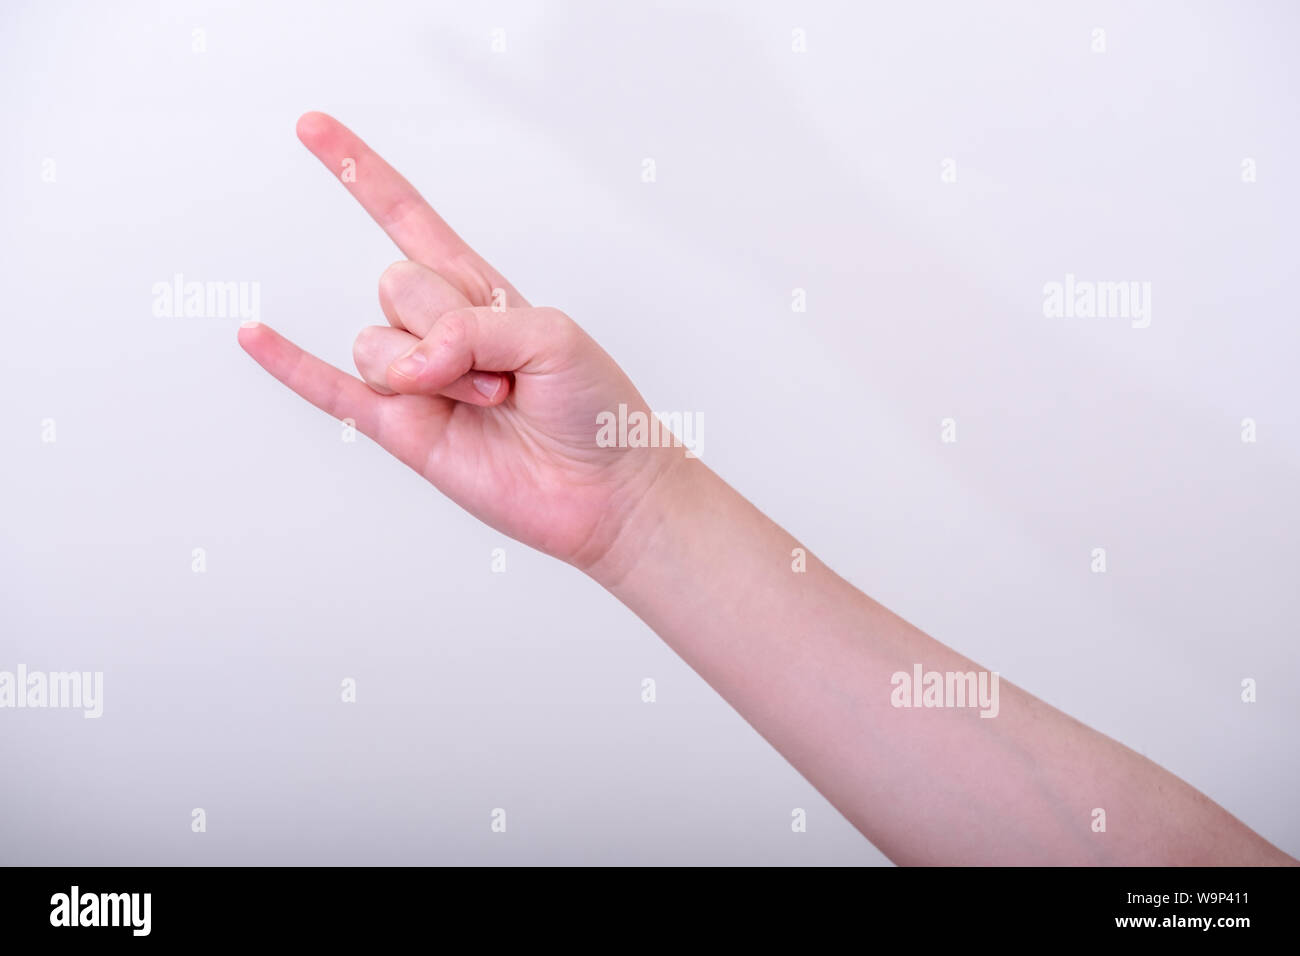 Woman rock or heavy metal music hand sign isolated on white background Stock Photo